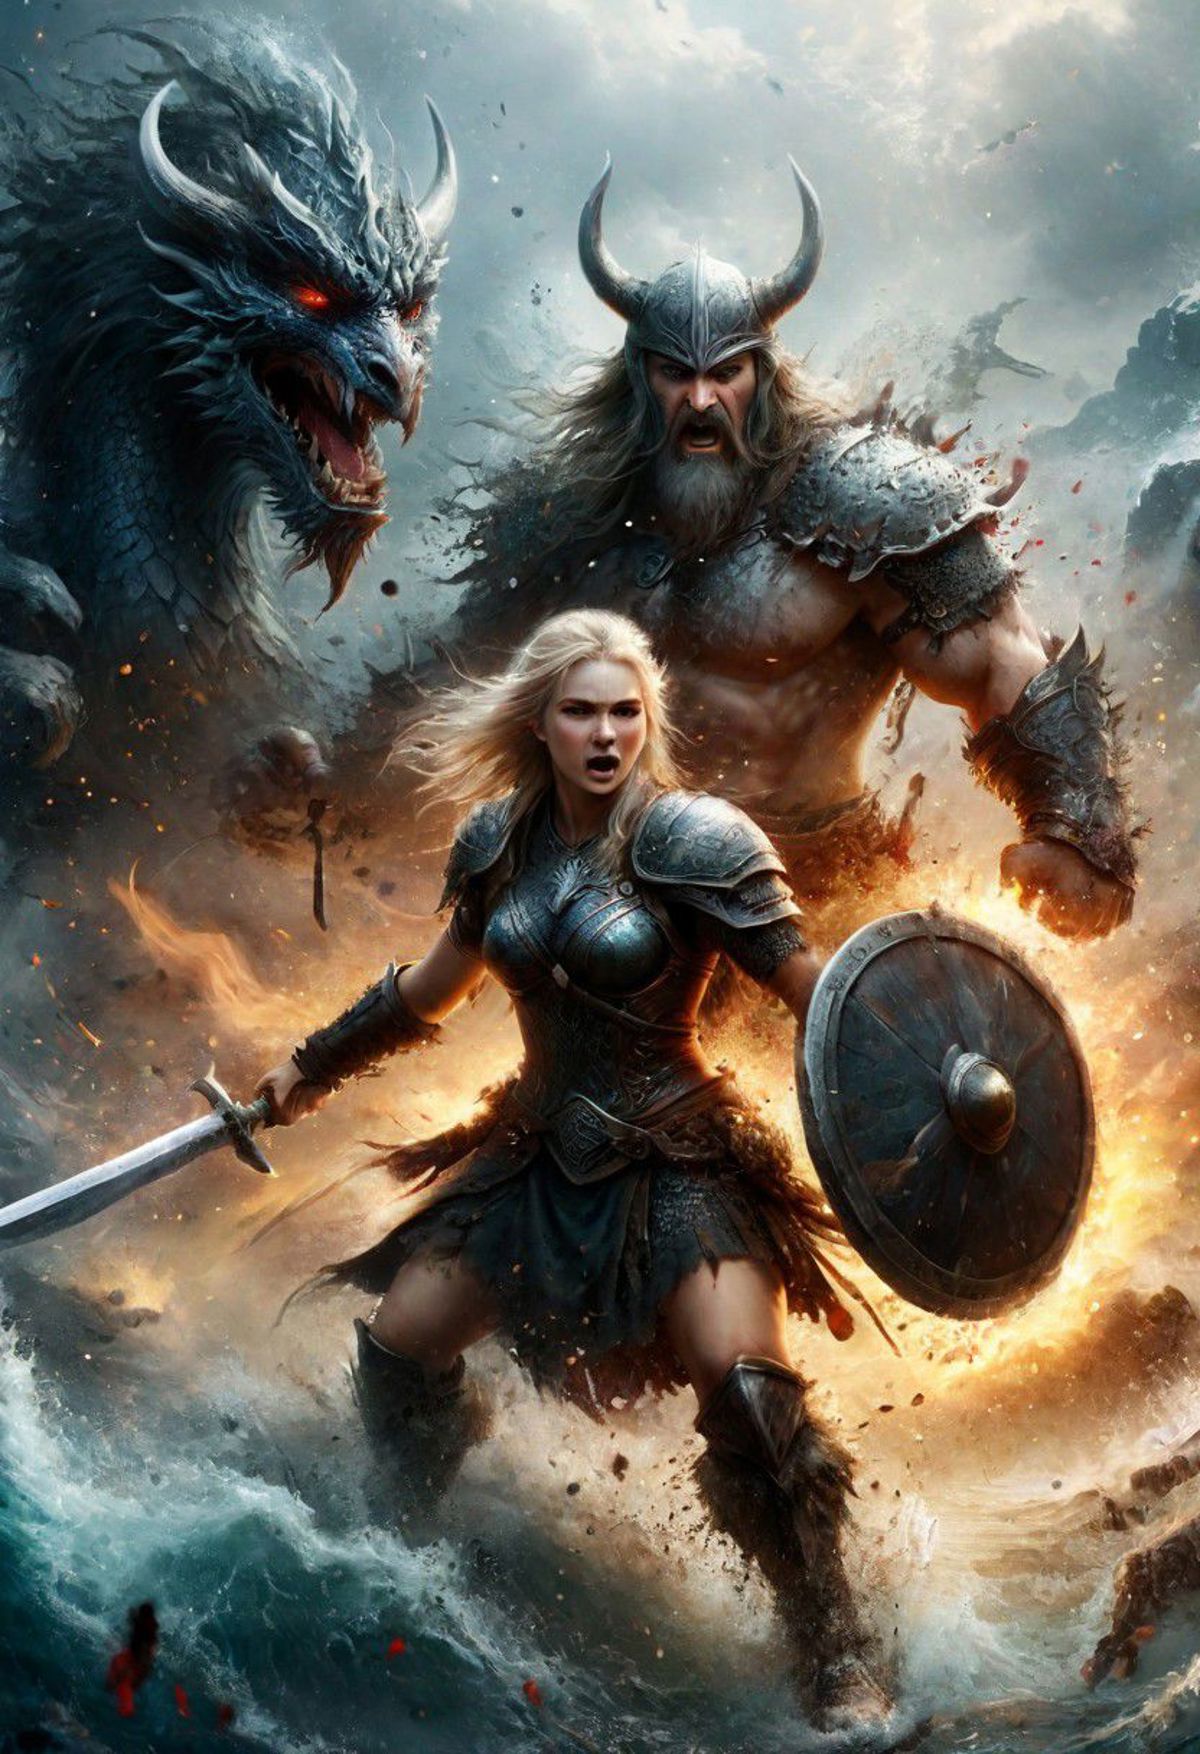 A Fantasy Art Illustration of a Warrior Woman and a Bearded Man Fighting a Dragon.